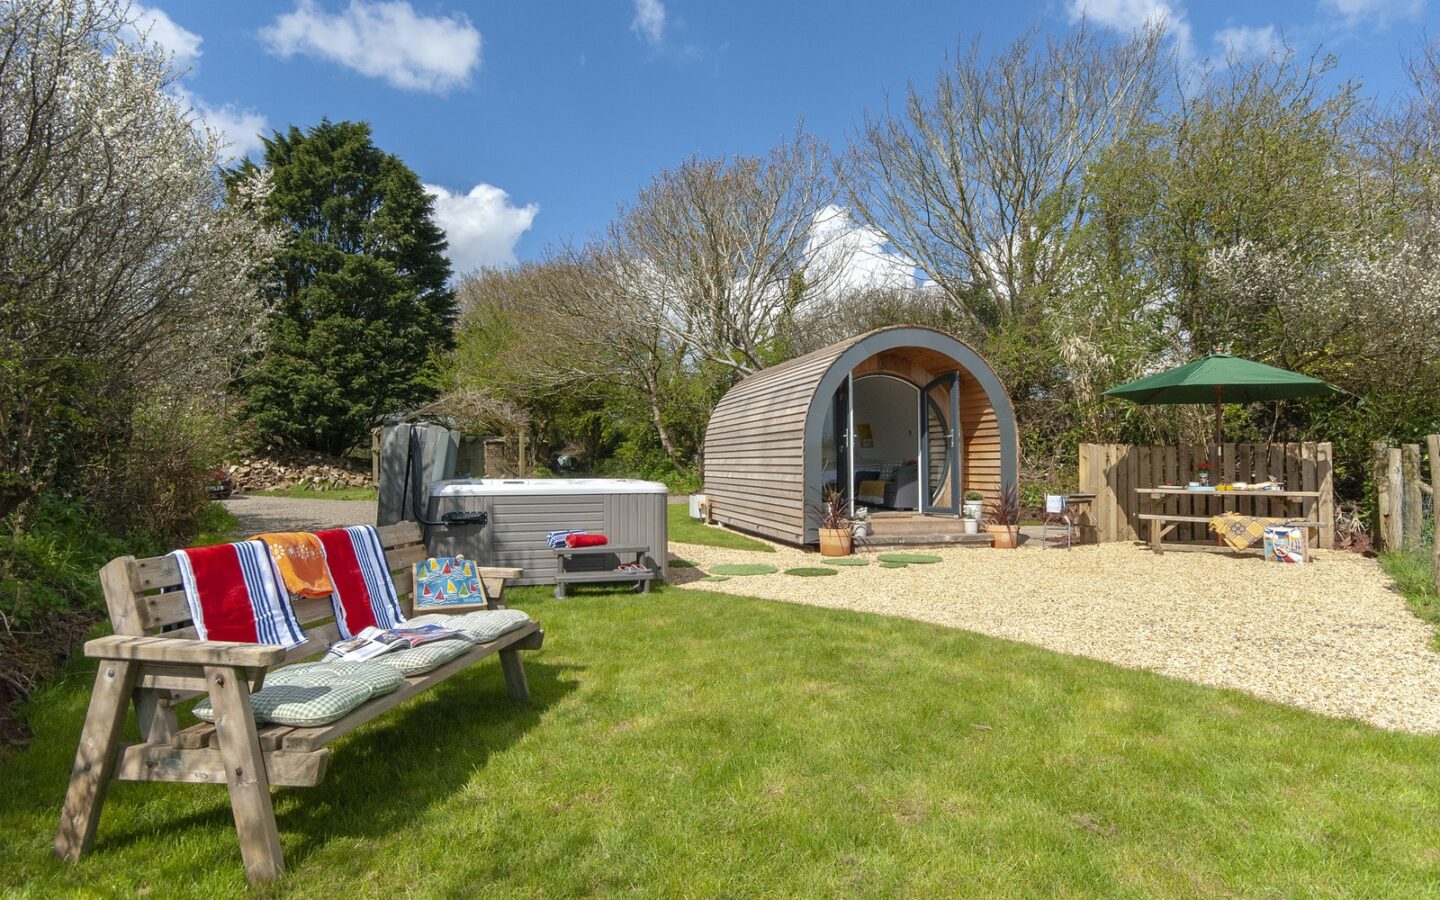 Glamping in Wales with hot tub, Hafan Fach Glamping Pod outside